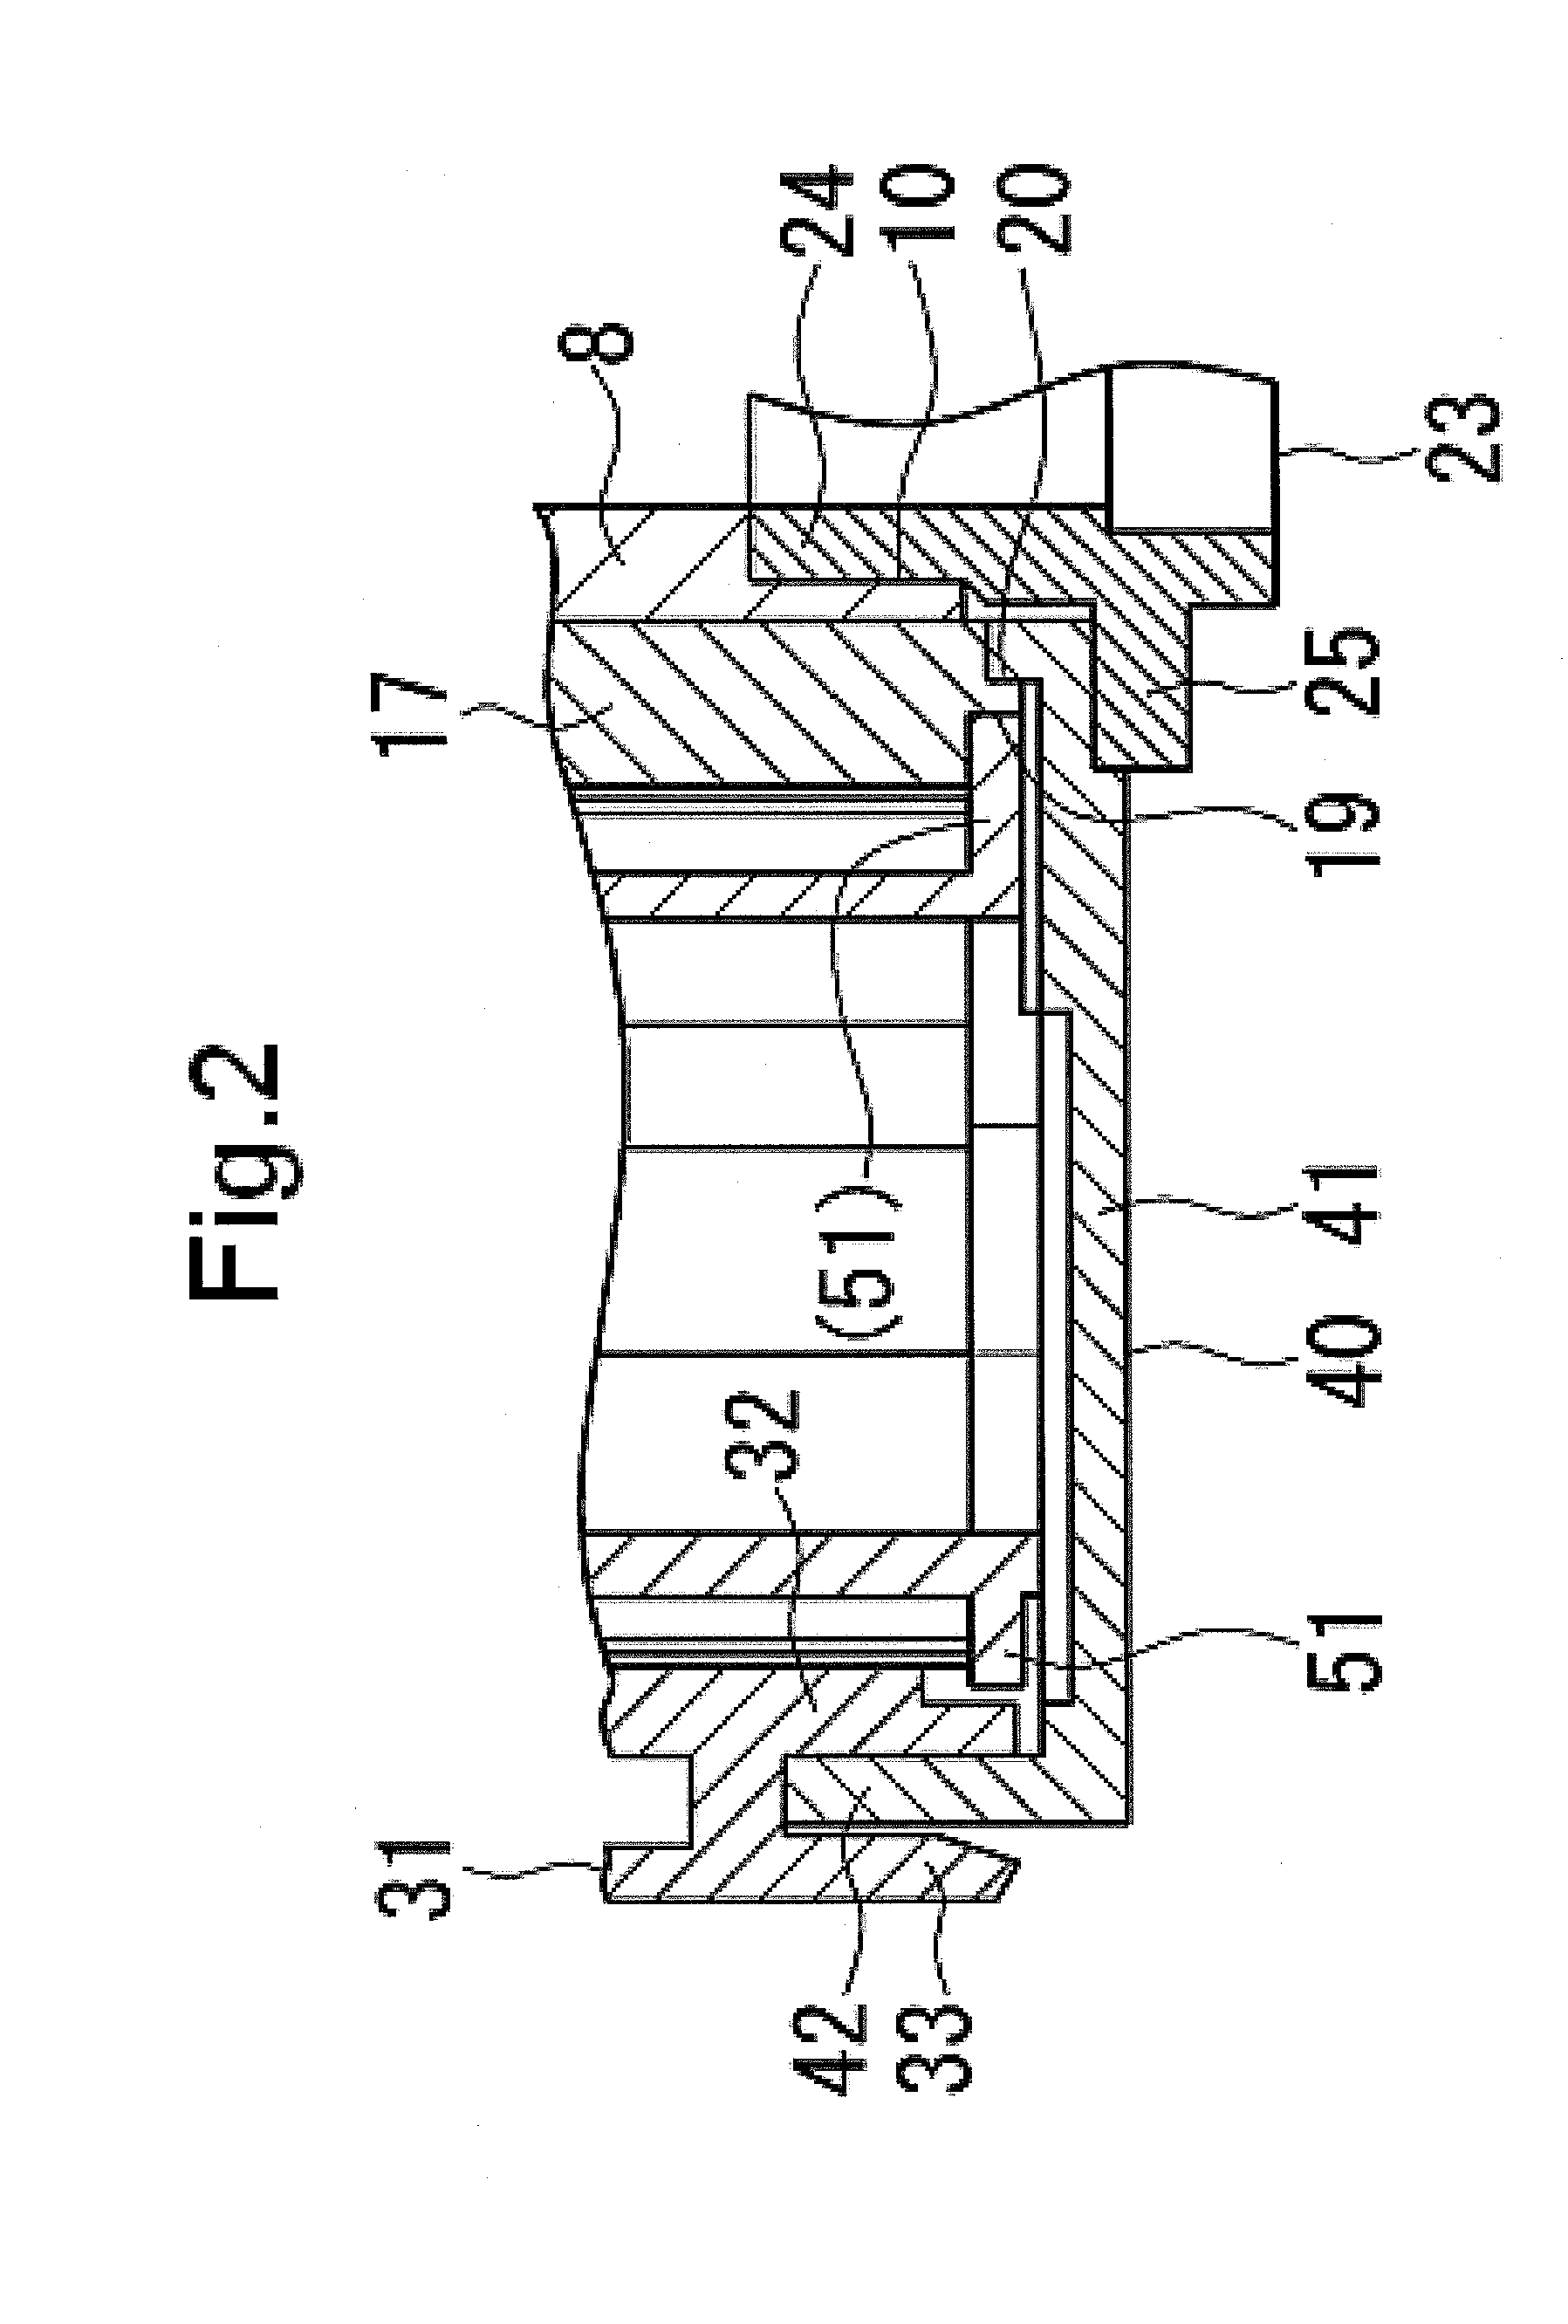 Rotational connector device